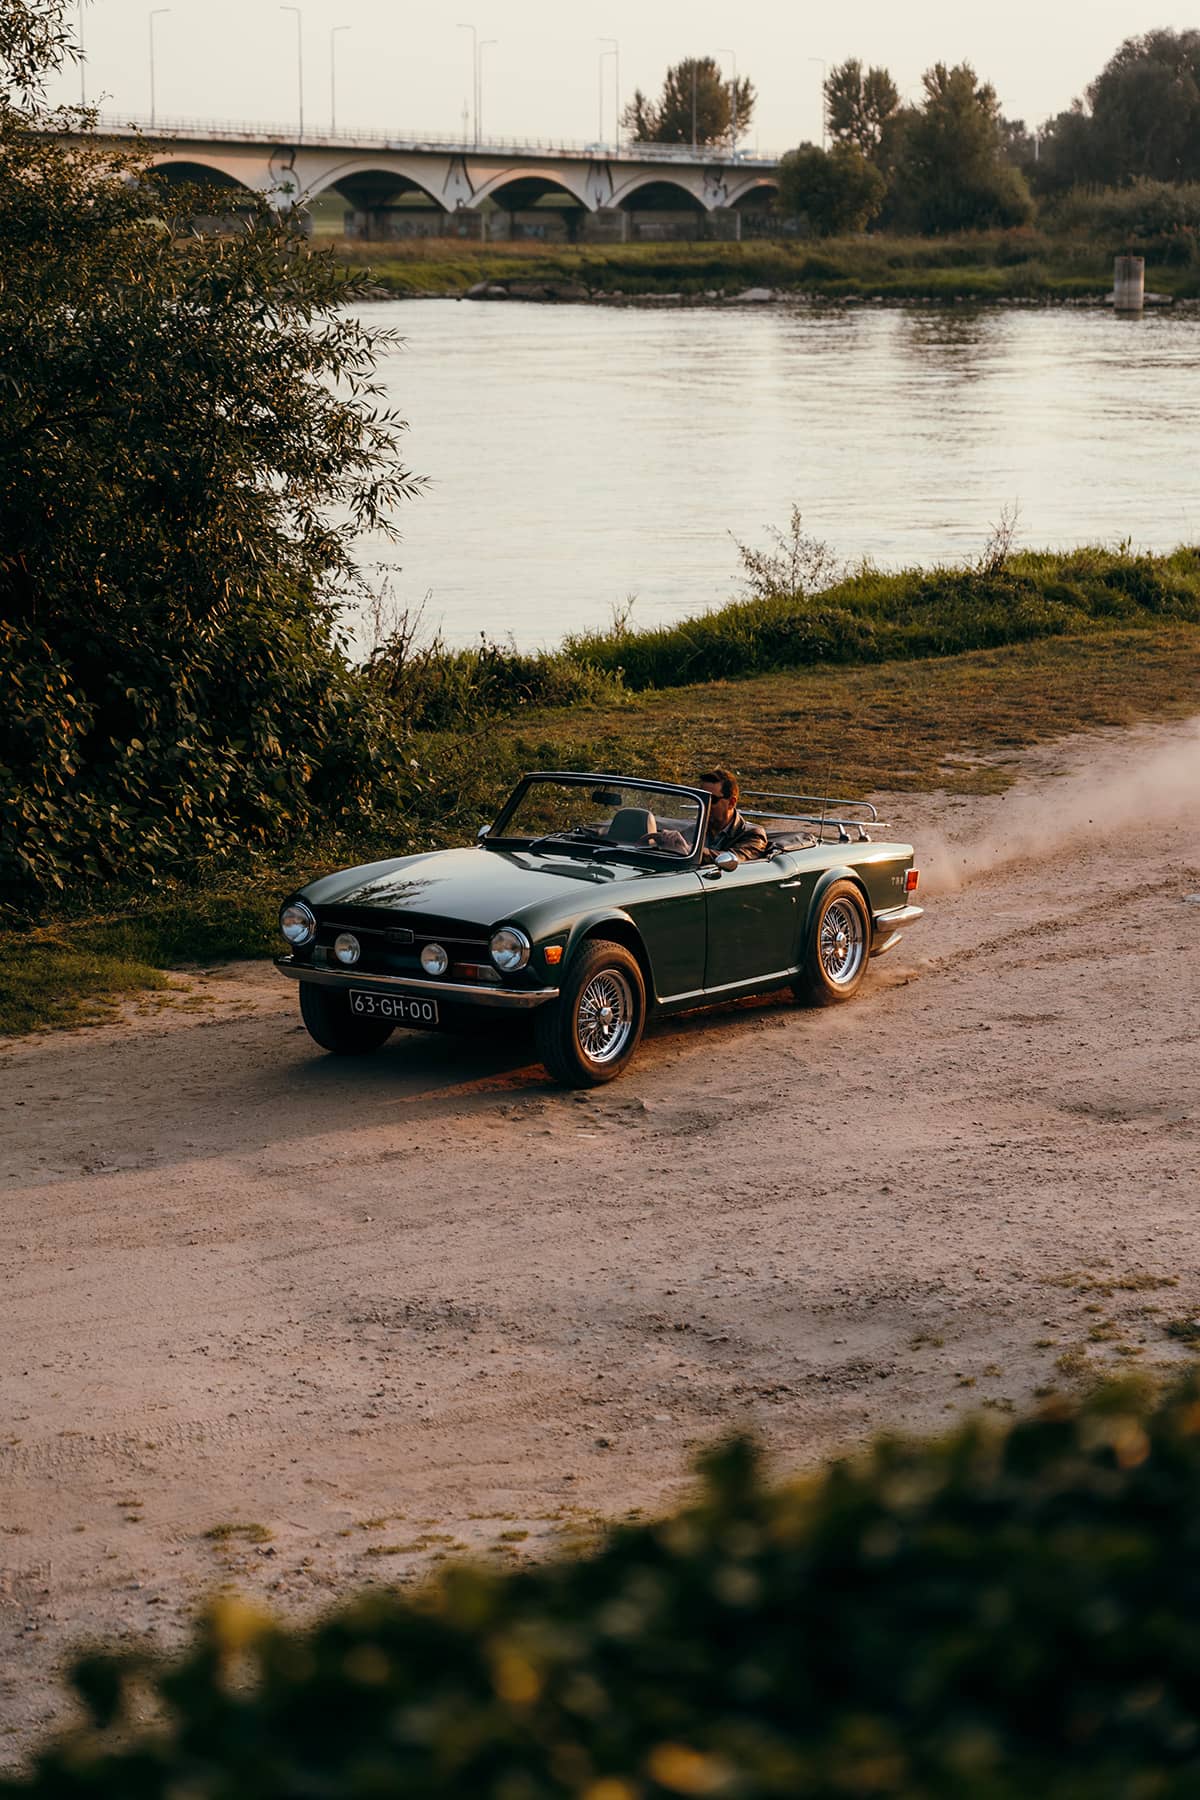 Triumph TR6 roadster in British Racing Green color.